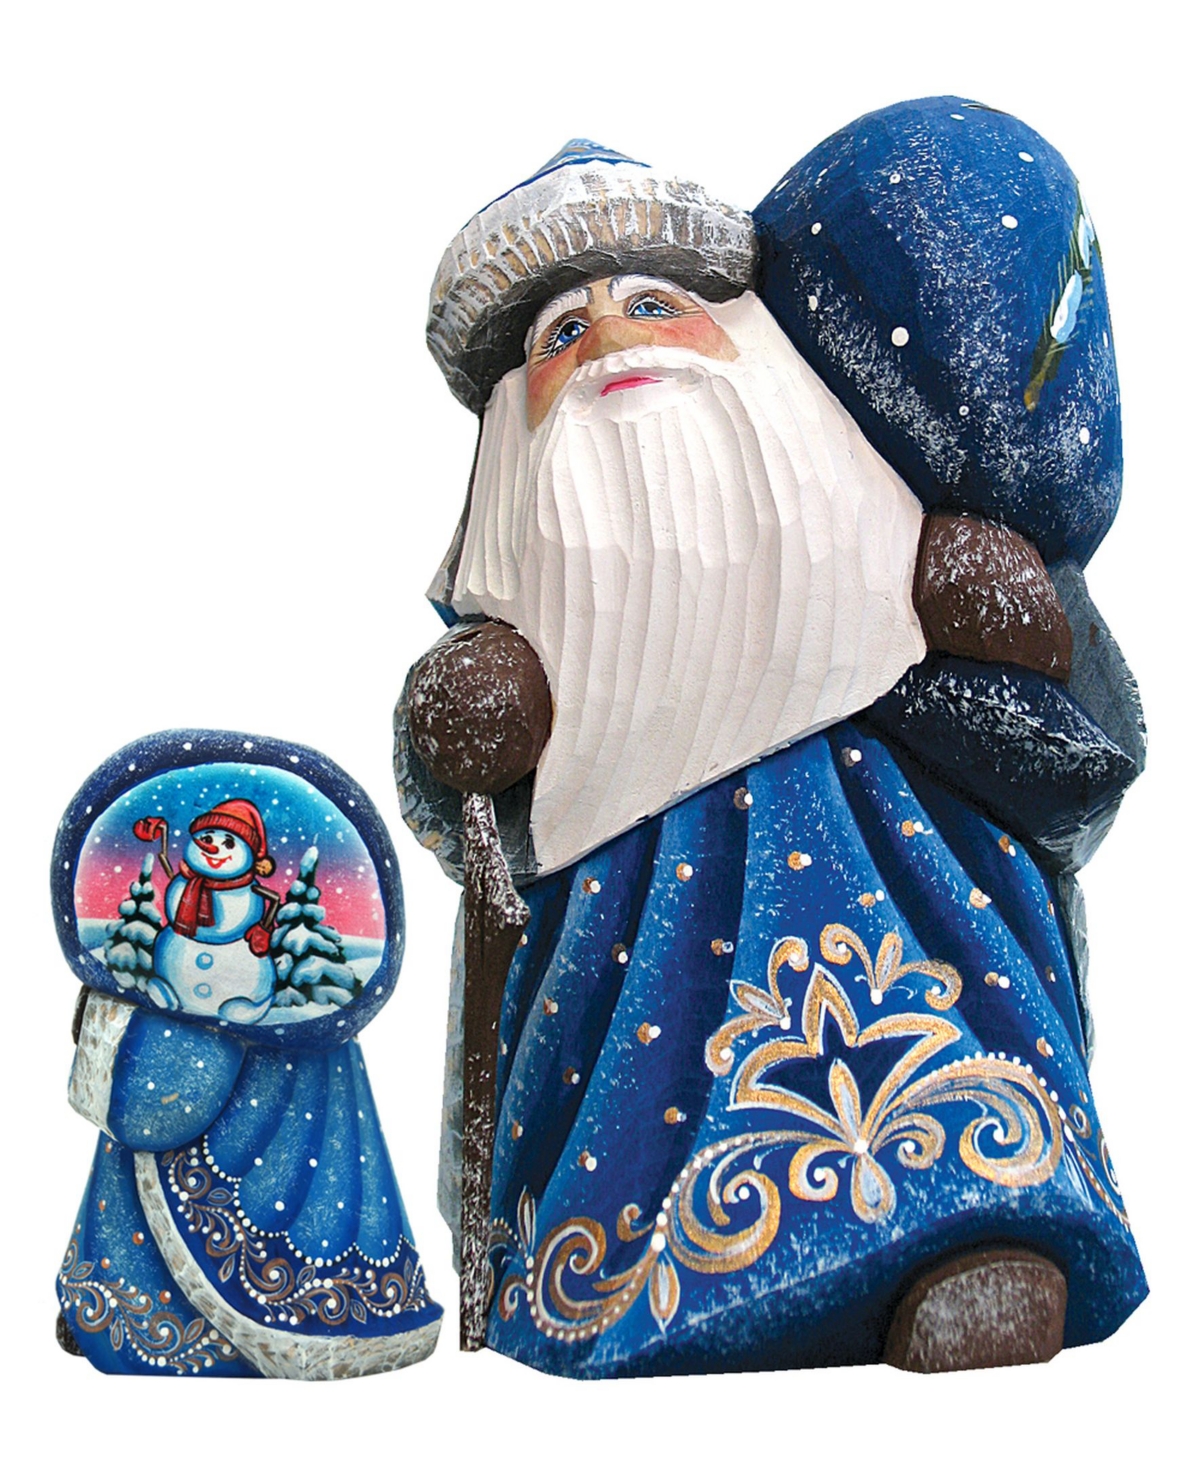 Woodcarved and Hand Painted Santa Snow Day Yuletide with Bag Figurine - Multi